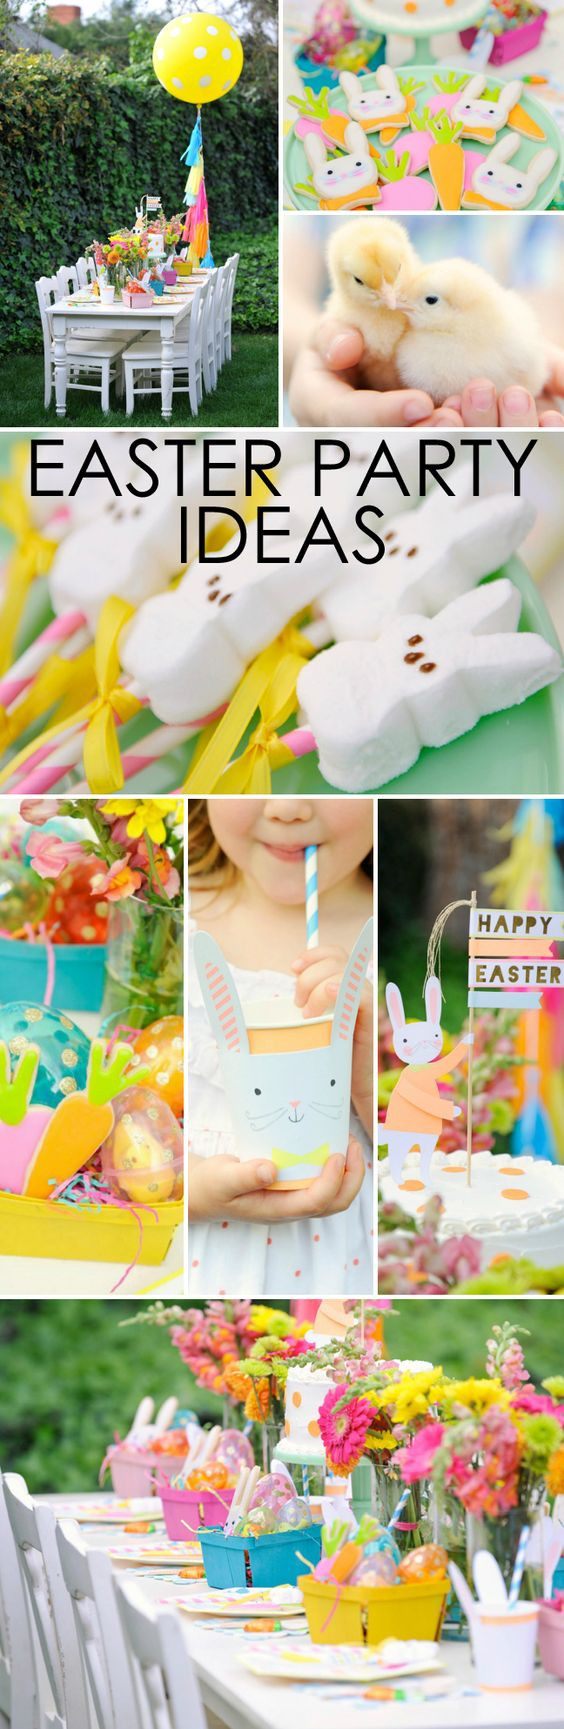 Easter Party Ideas Children
 Plan a Bunny tastic Kids Easter Party